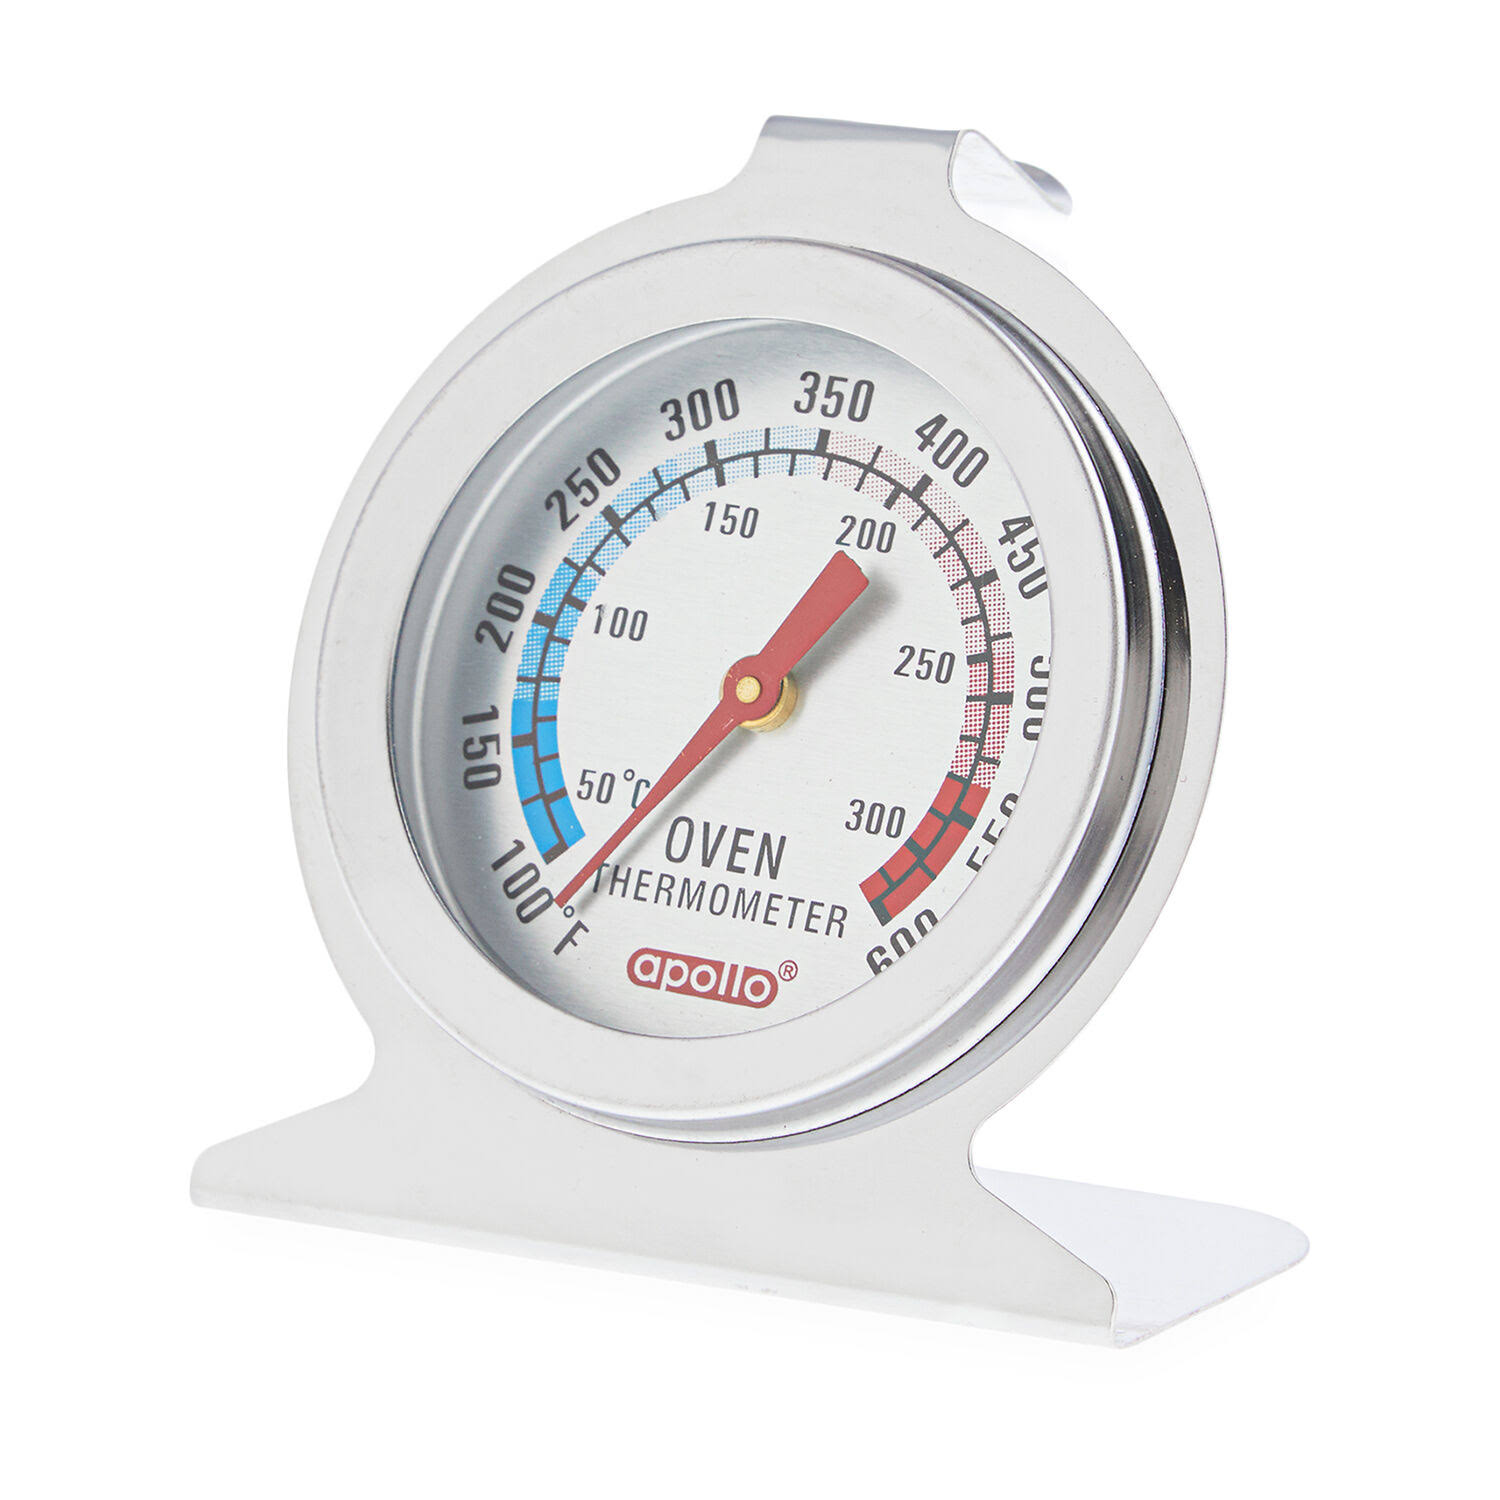 Apollo Analogue Dial Face Oven Thermometer